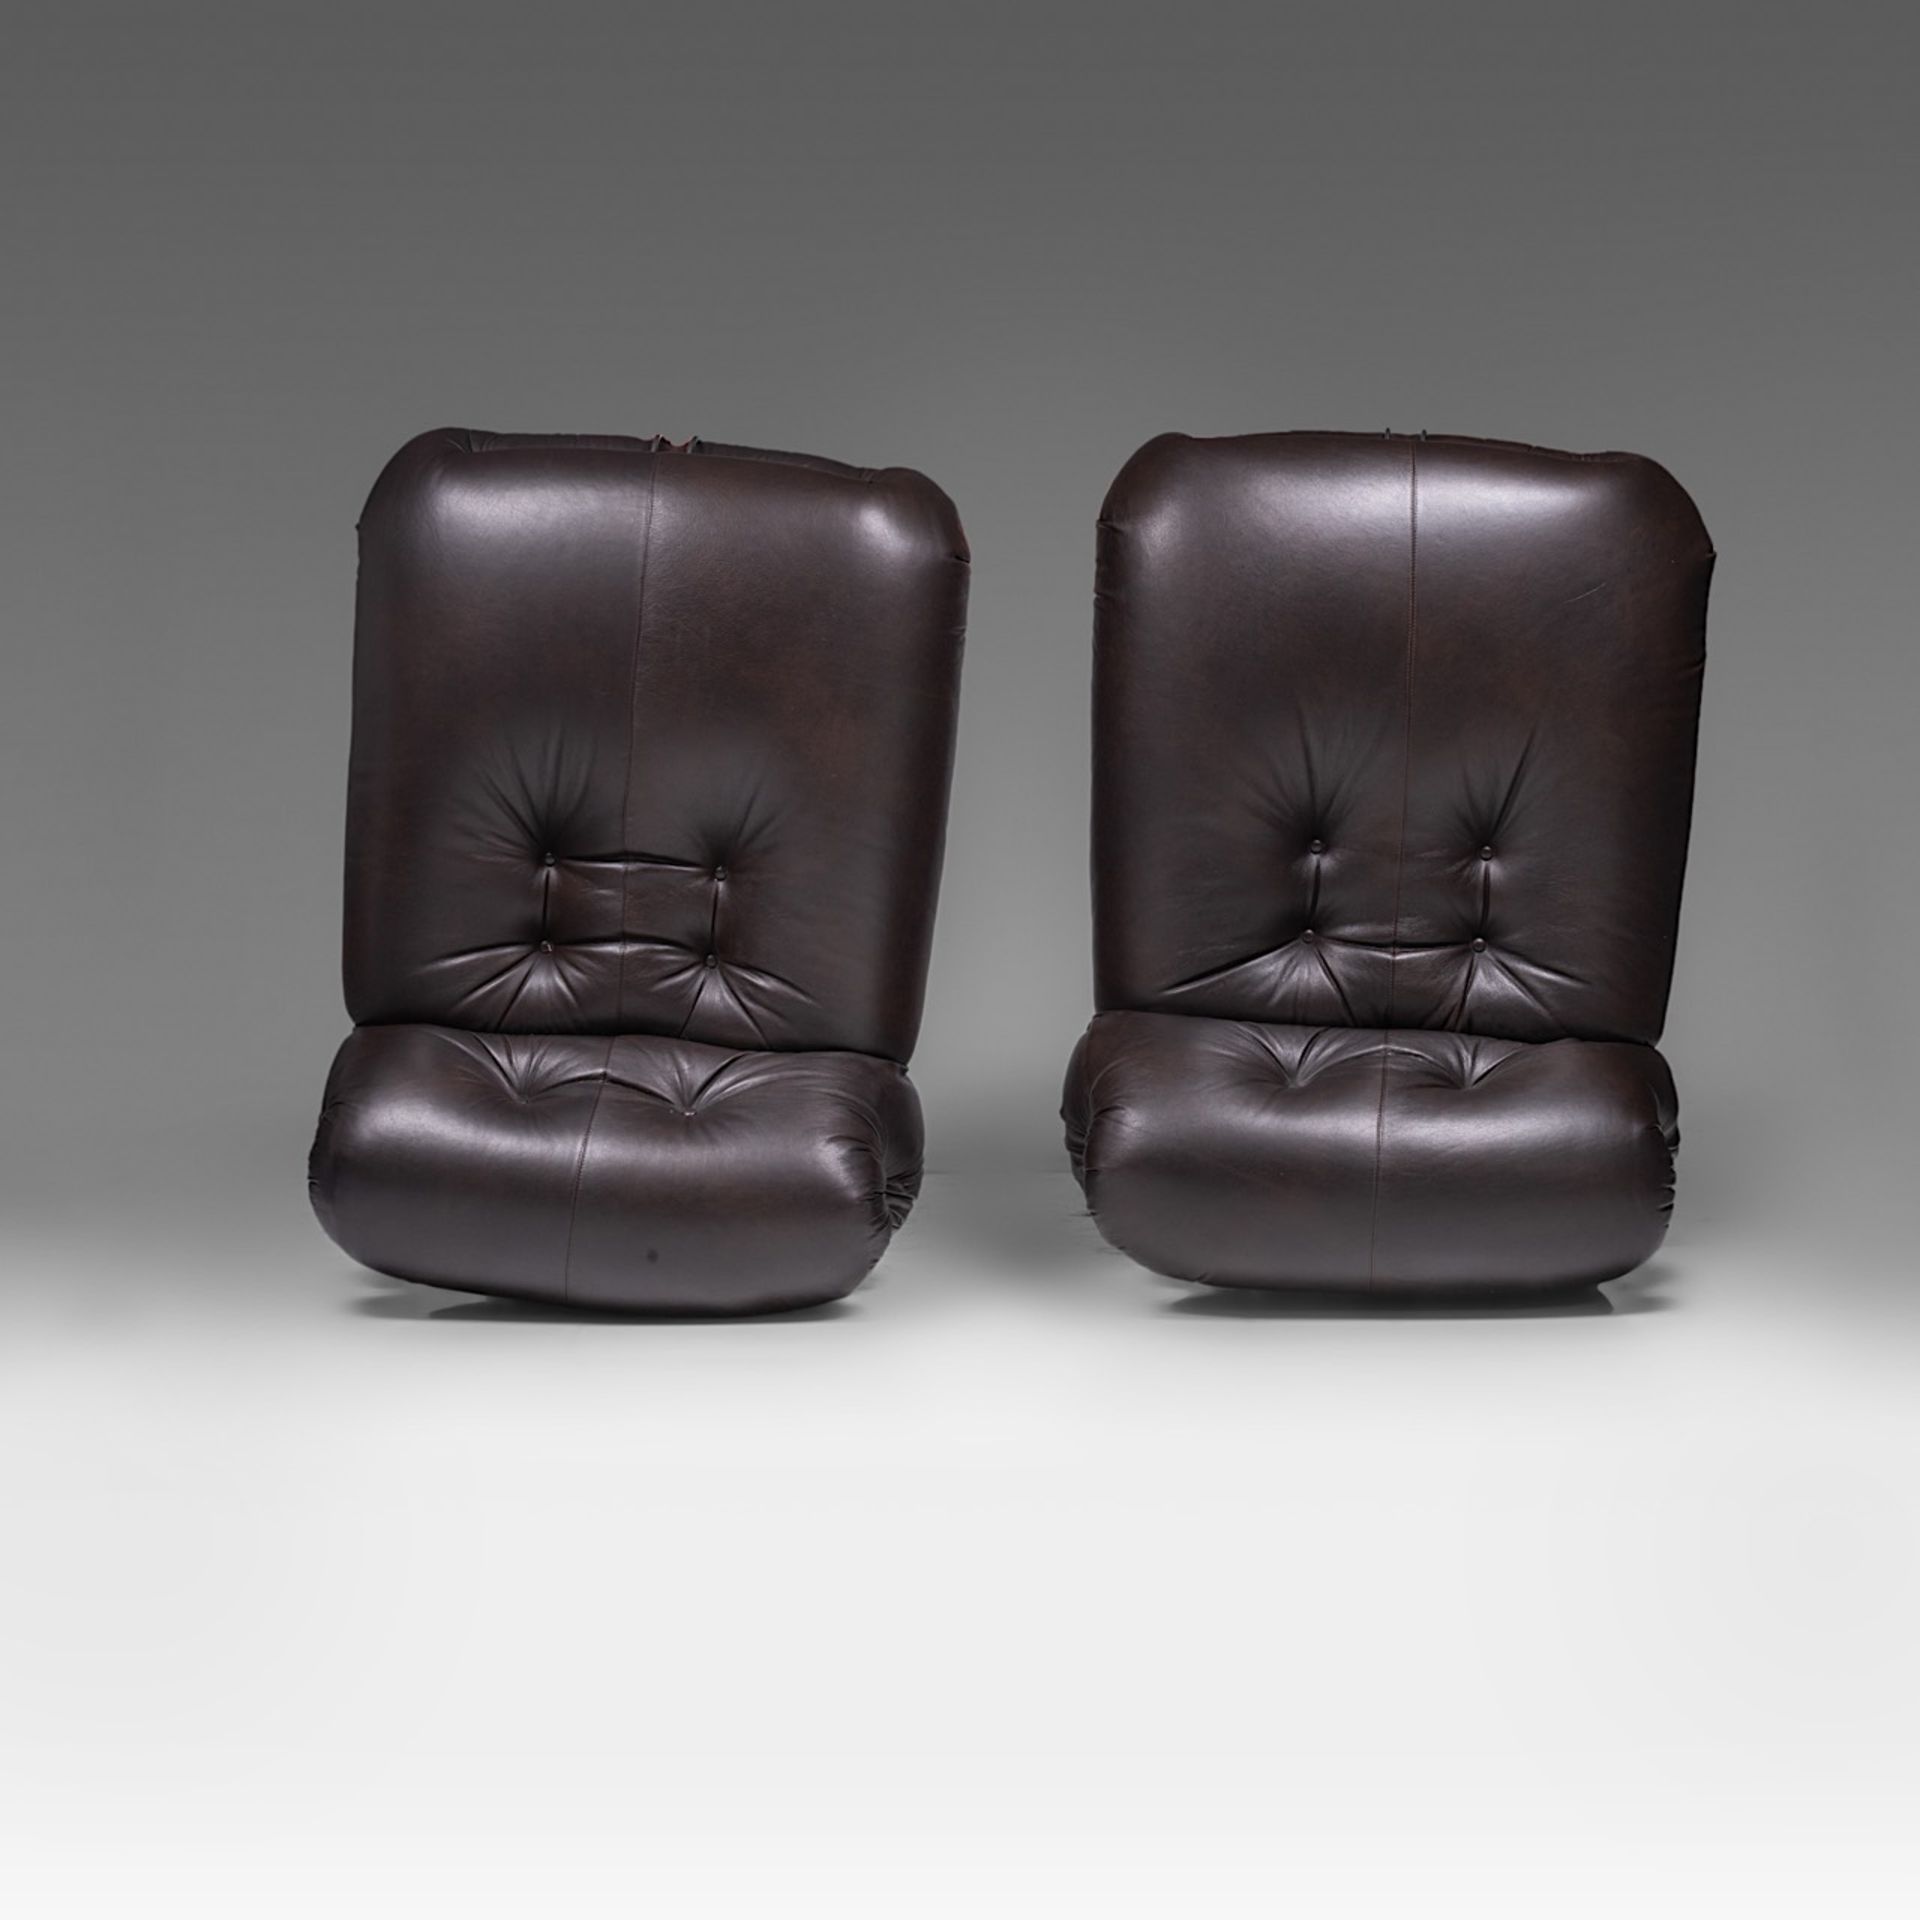 Two Soriana chaise-longues in brown leather and chrome by Afra & Tobia Scarpa for Cassina - Image 6 of 8